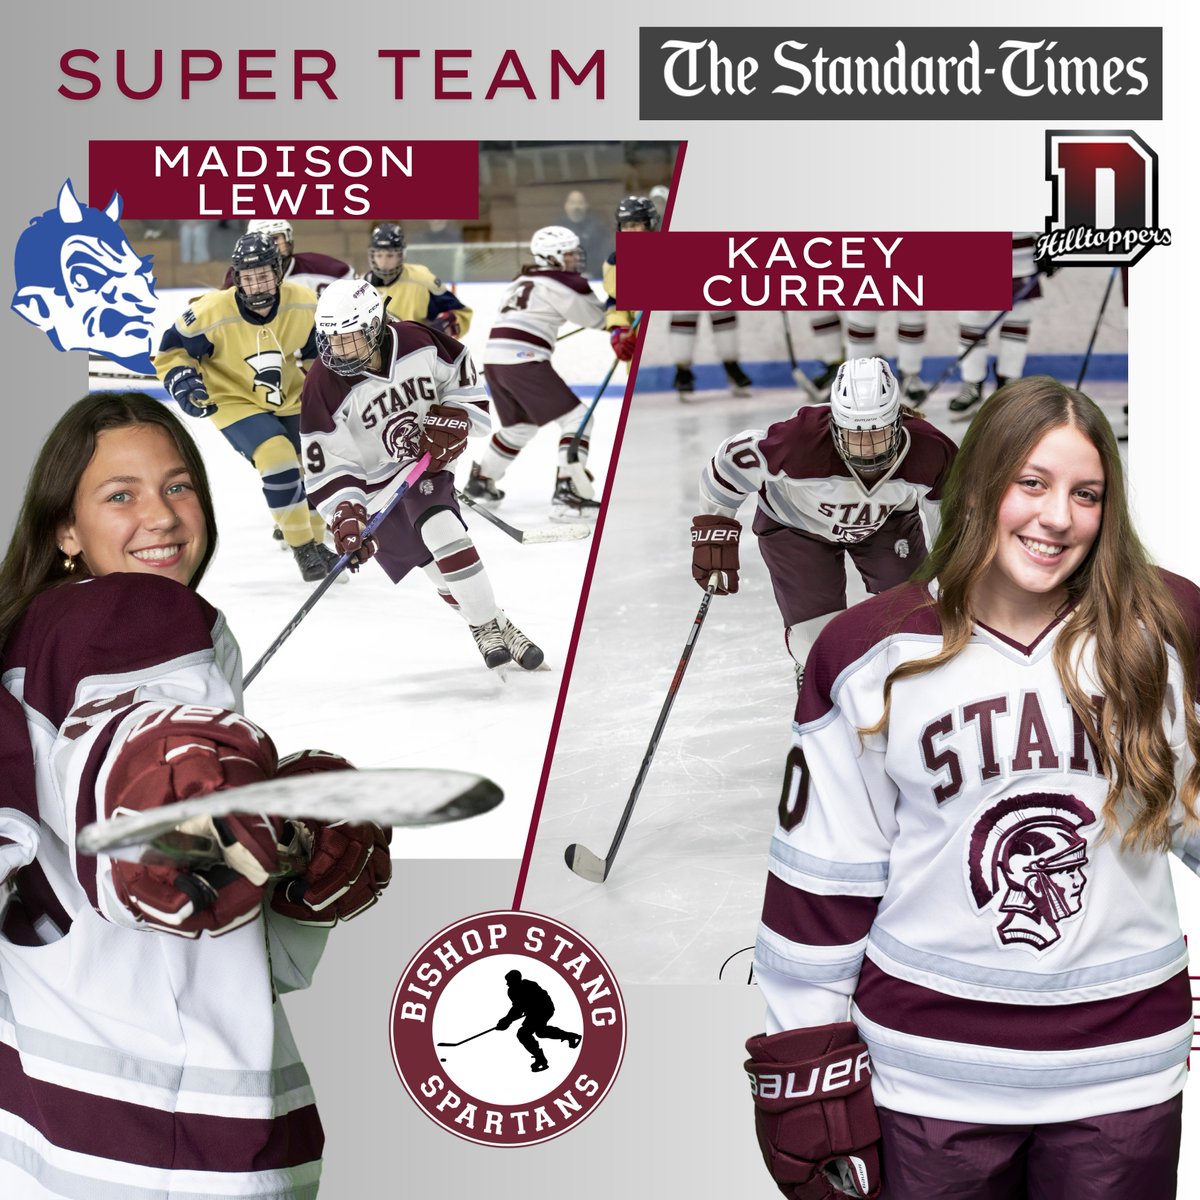 HUGE congrats to Fr. Maddie Lewis and Jr. Kacey Curran on being named to the Standard Times Super Team for Girls Hockey! Madison comes to us from Fairhaven, and Kacey comes to us from Durfee as part of our co-op team, and we are extremely fortunate to have them! @SC_Varsity